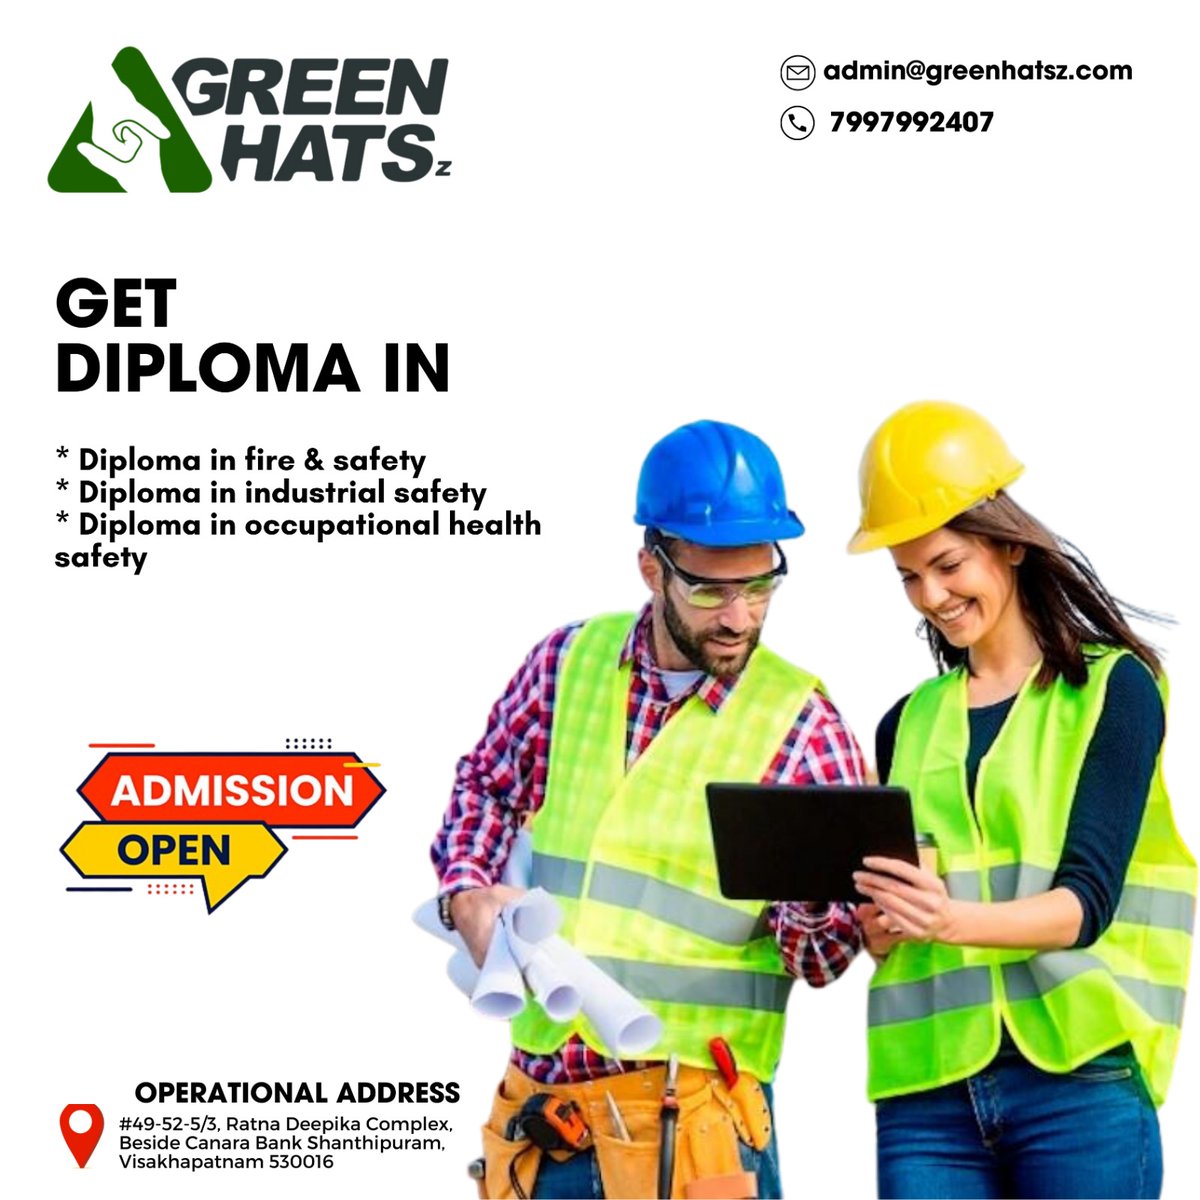 Ready to take your career to the next level with environmental safety? Get your diploma in Greenhatsz today! 💼
#GreenhatszDiploma #EnvironmentalSafety #AdmissionsOpen #FireSafetyDiploma #SafetyTraining #FirePrevention
#EmergencyResponse #RiskAssessment #SafetyProfessionals